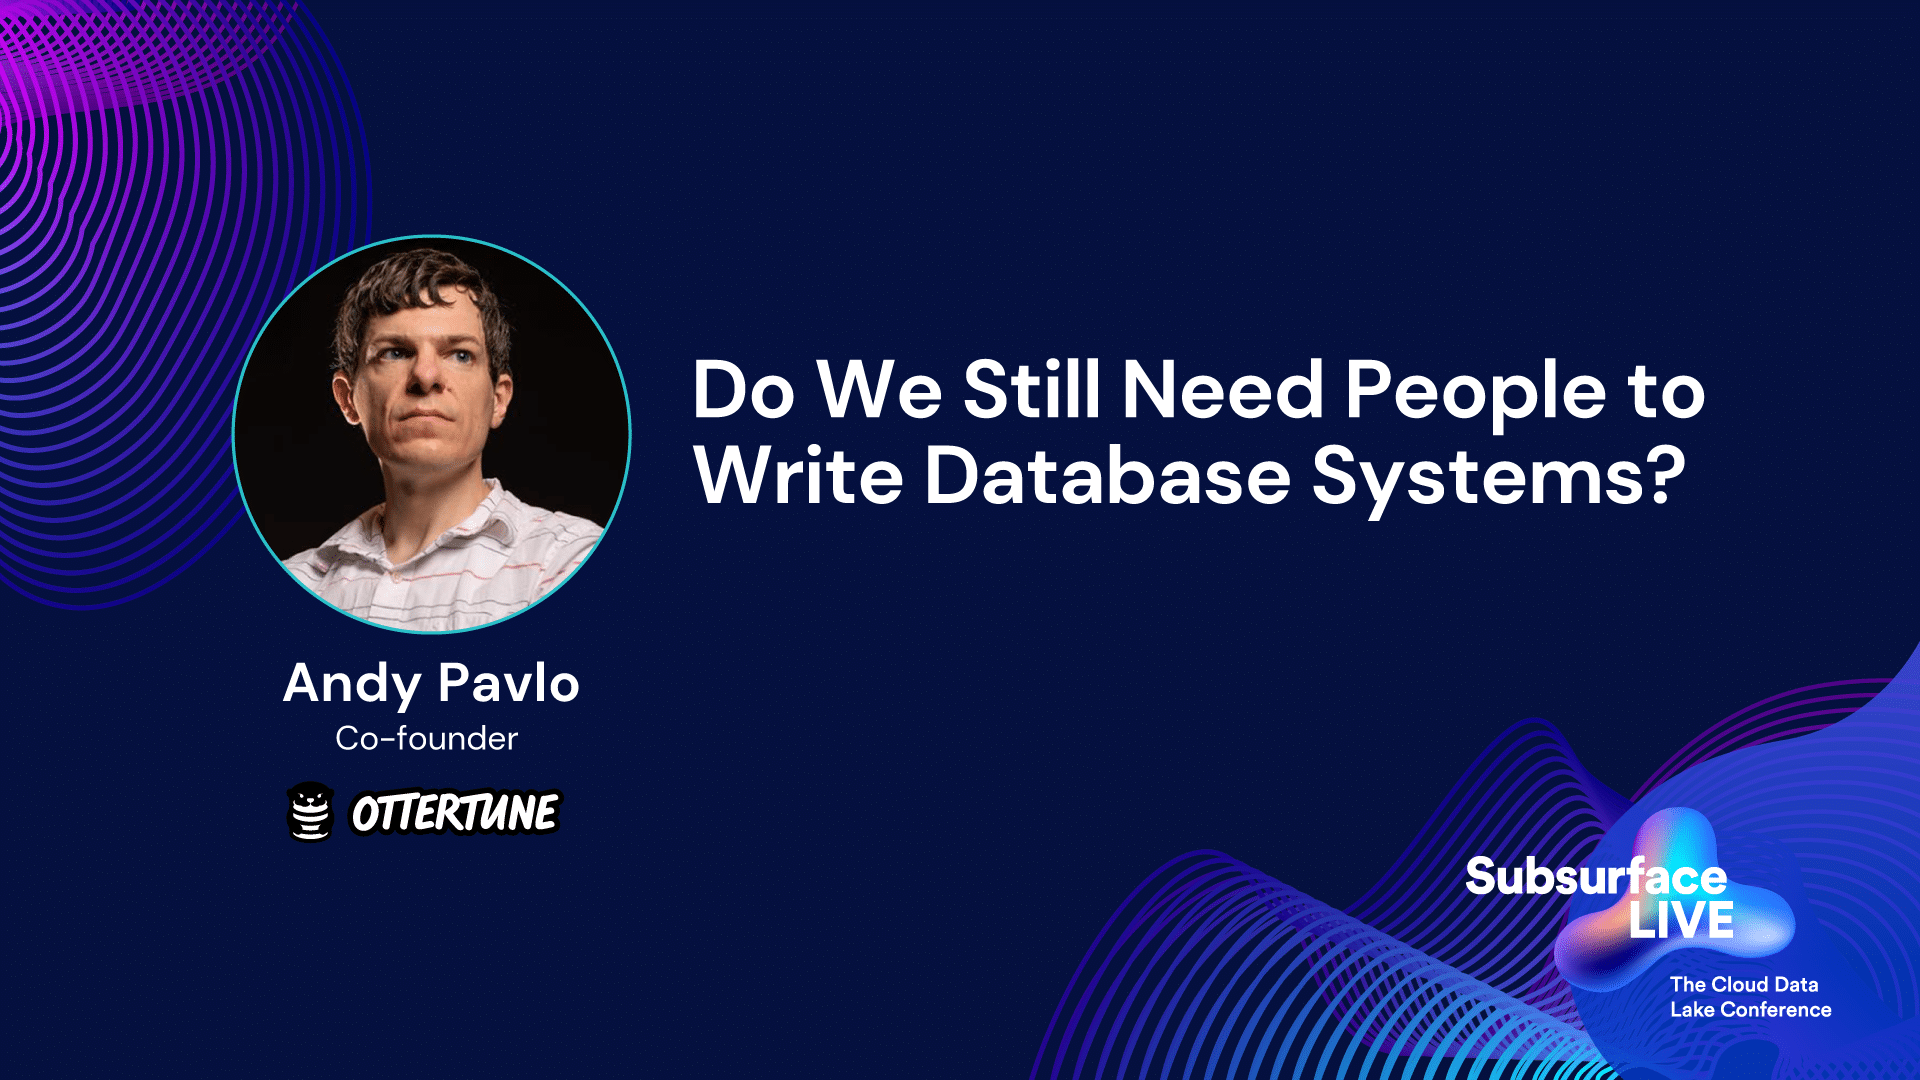 Do We Still Need People to Write Database Systems?